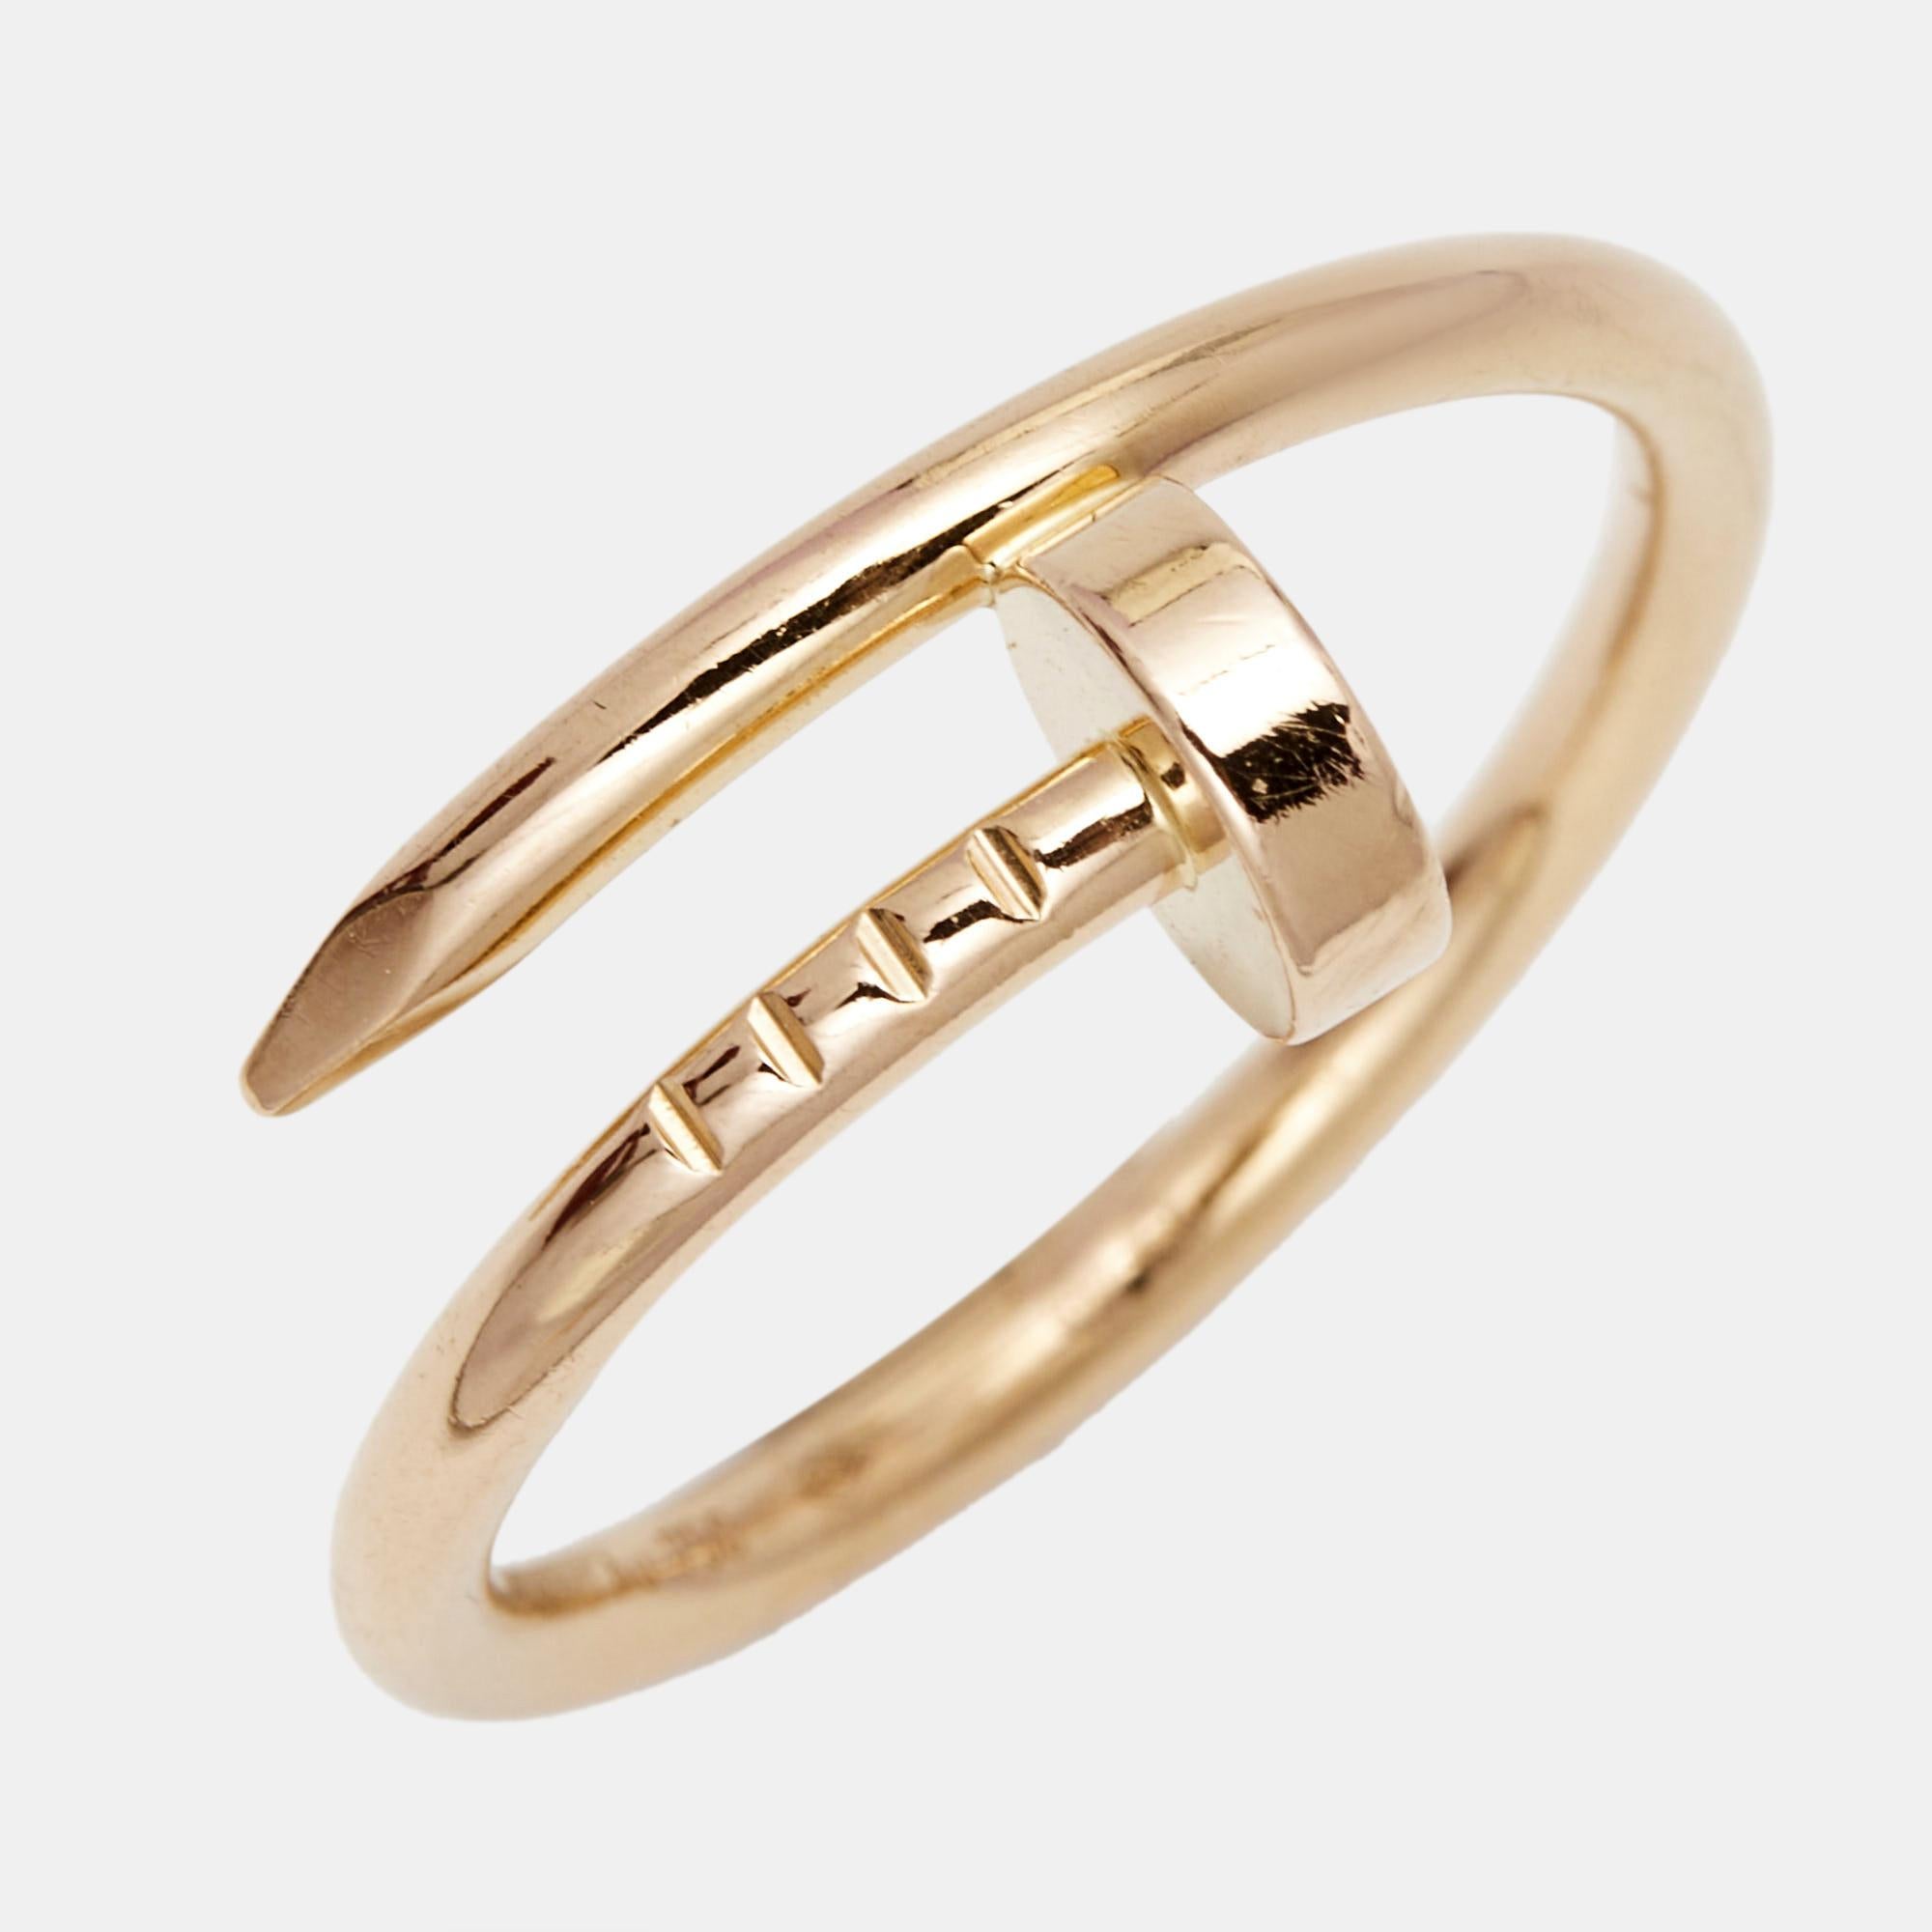 Cartier Juste Un Clou 18k Rose Gold Small Model Ring Size 52 For Sale 1